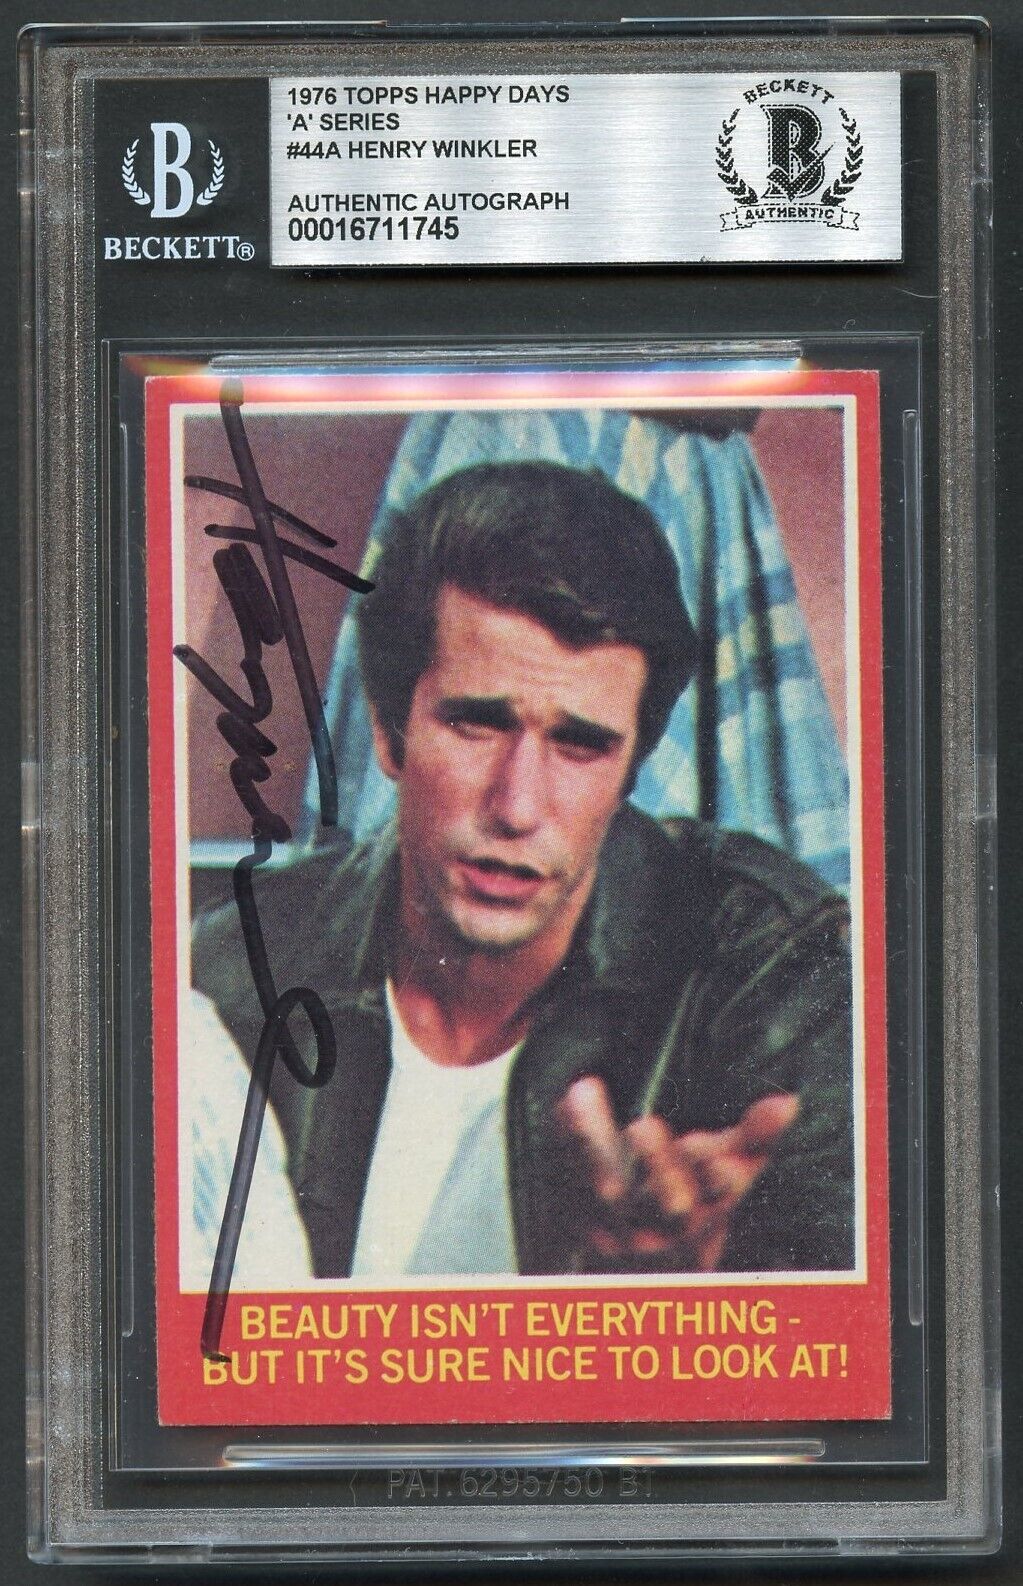 Henry Winkler #44A signed autograph 1976 Topps Happy Days A Series Card BAS Slab